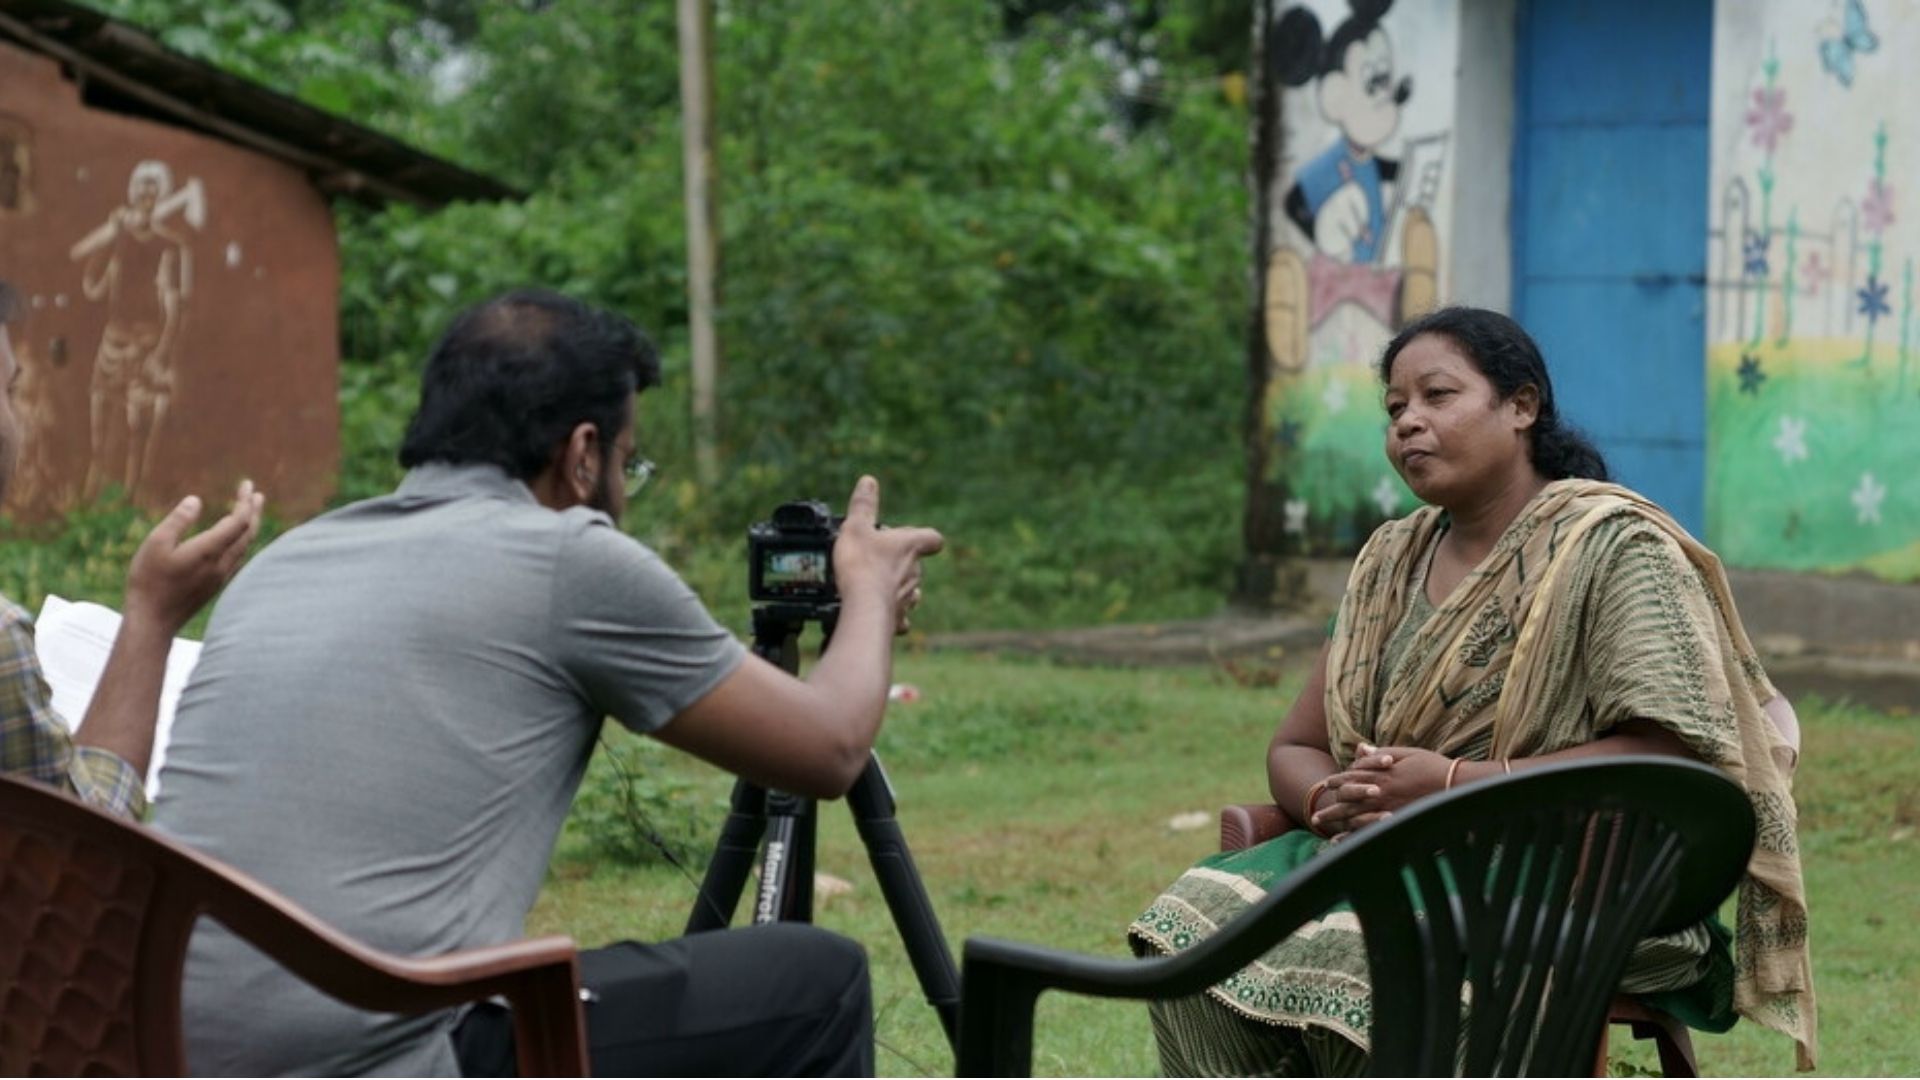 Preethi, a social worker with CINI India, being interviewed by two men, one who has a camera